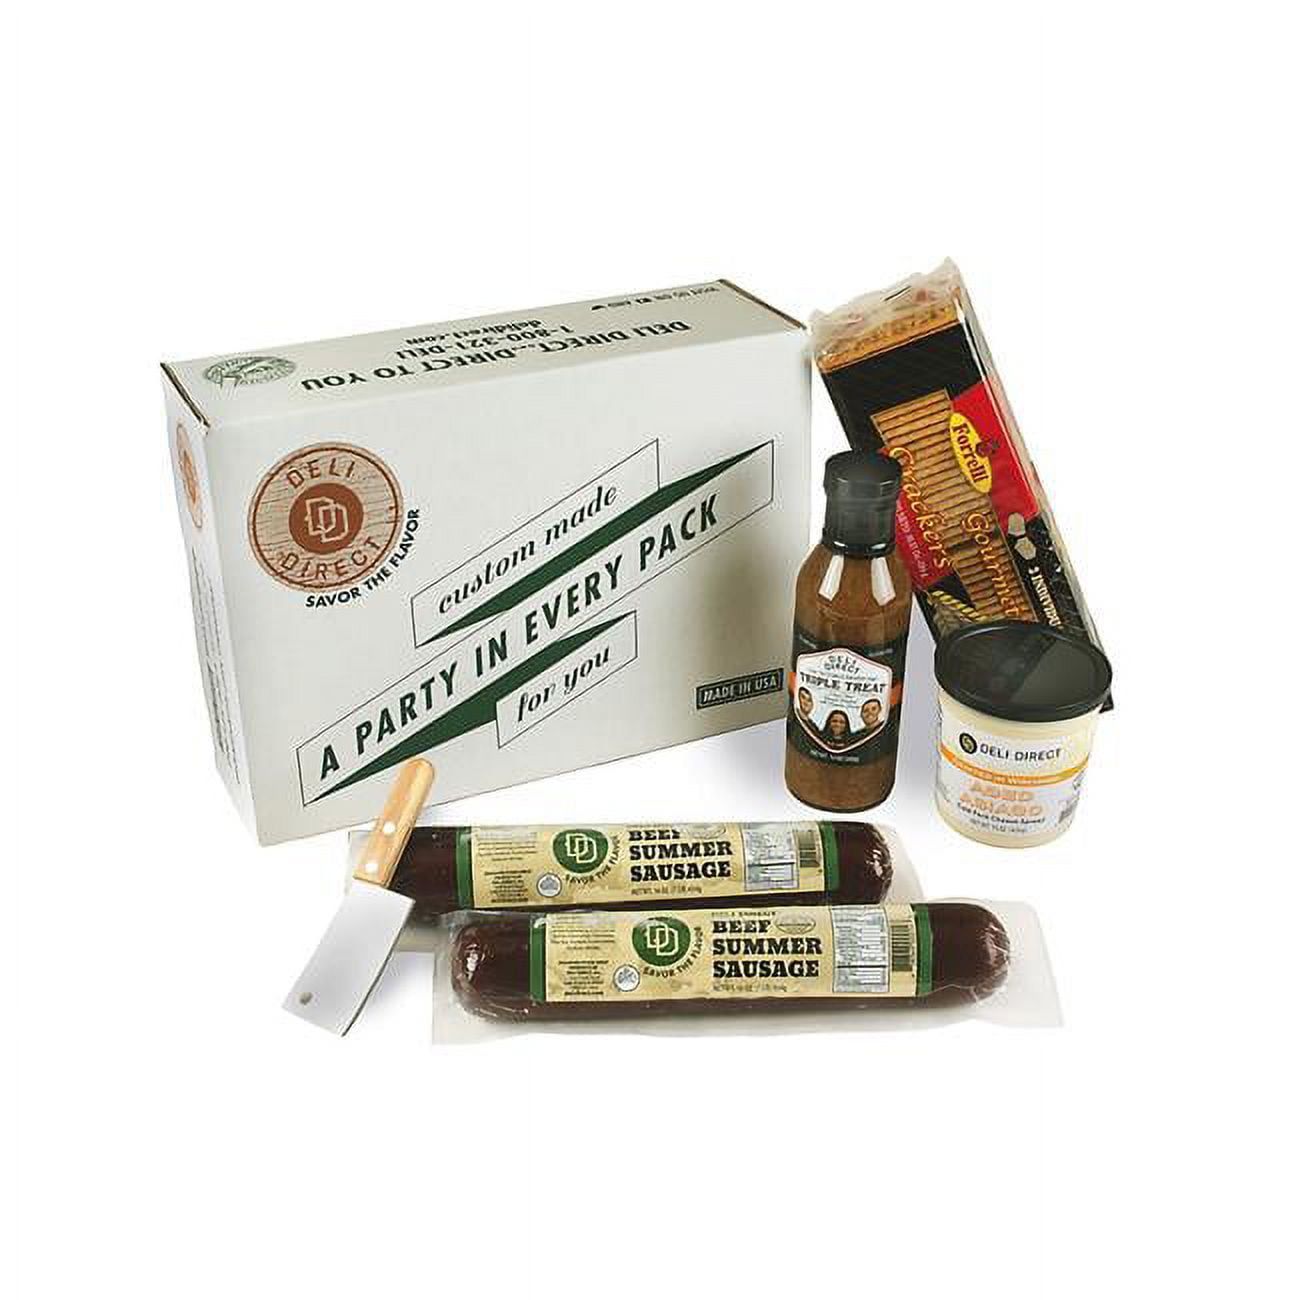 Picture of Deli Direcct & Farmers Market DDSUPR-2974 Sausage & Cheese Super Party Pack